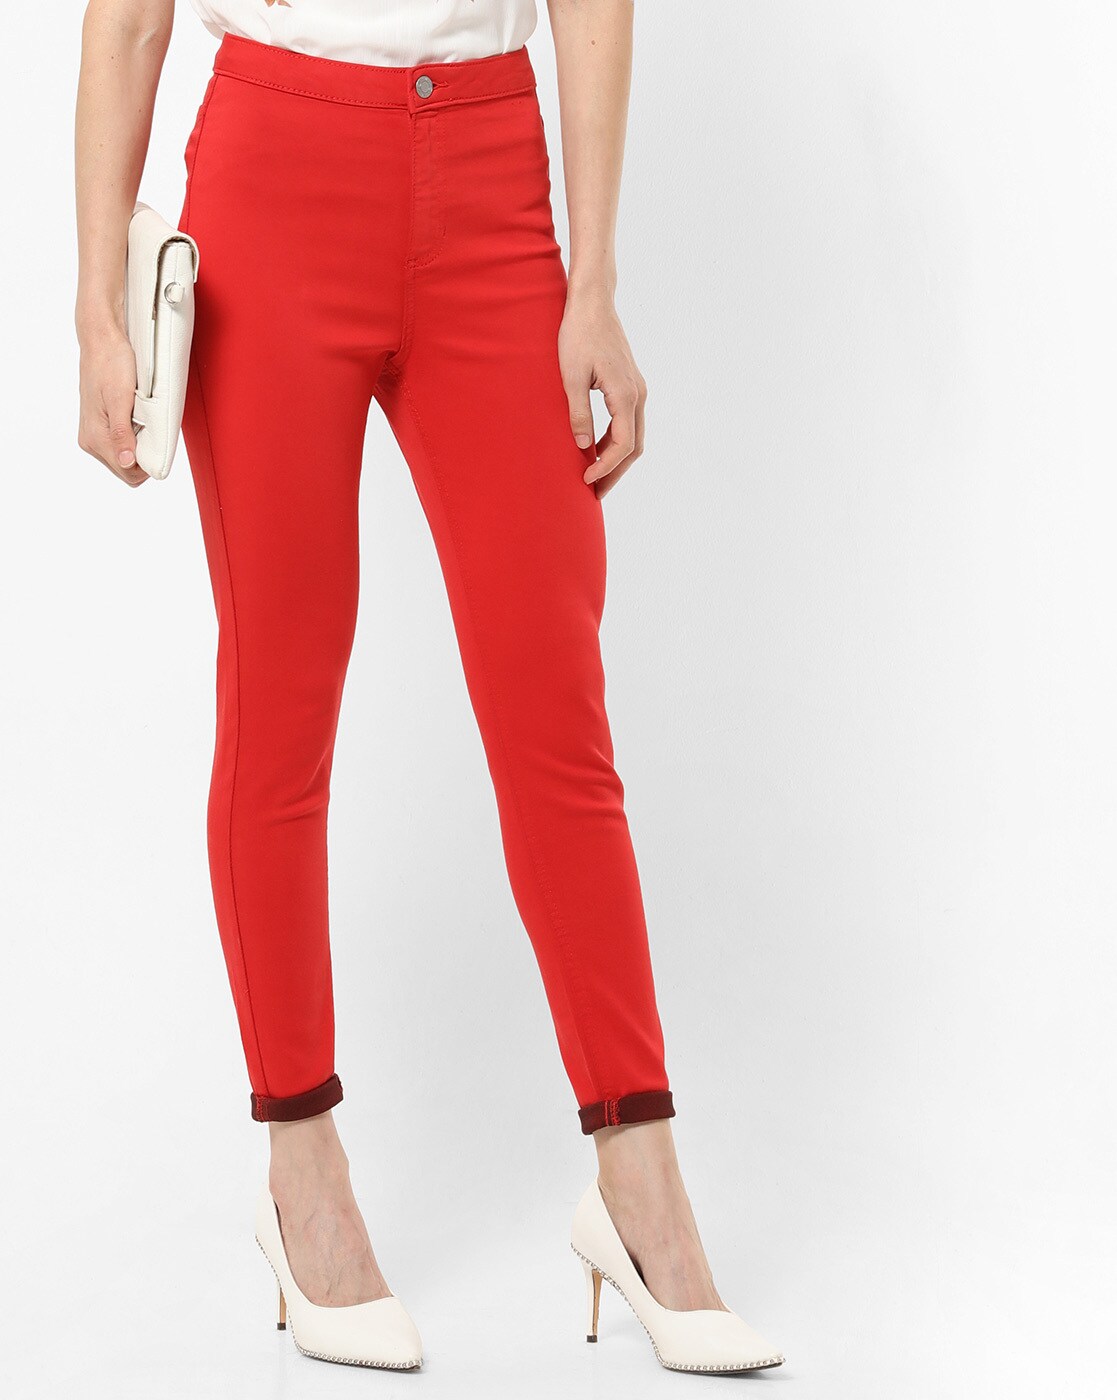 marks and spencer red jeans